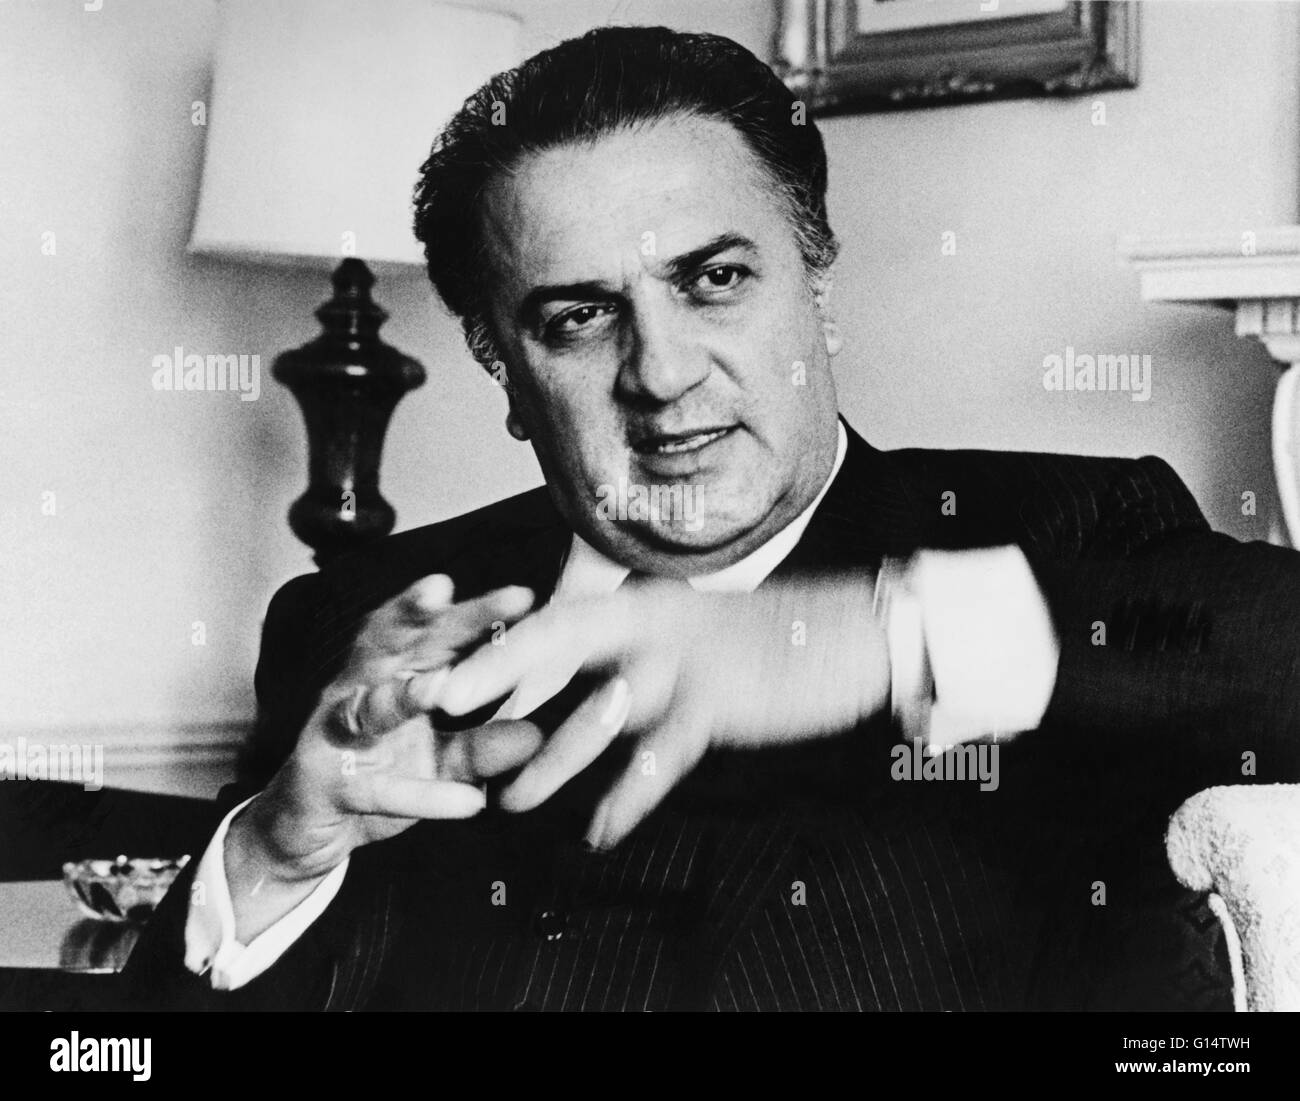 Fellini, photographed in 1965 by Walter Albertin. Federico Fellini (January 20, 1920 - October 31, 1993) was an Italian film director and scriptwriter. Known for a distinct style that blends fantasy and baroque images, he is considered one of the most inf Stock Photo